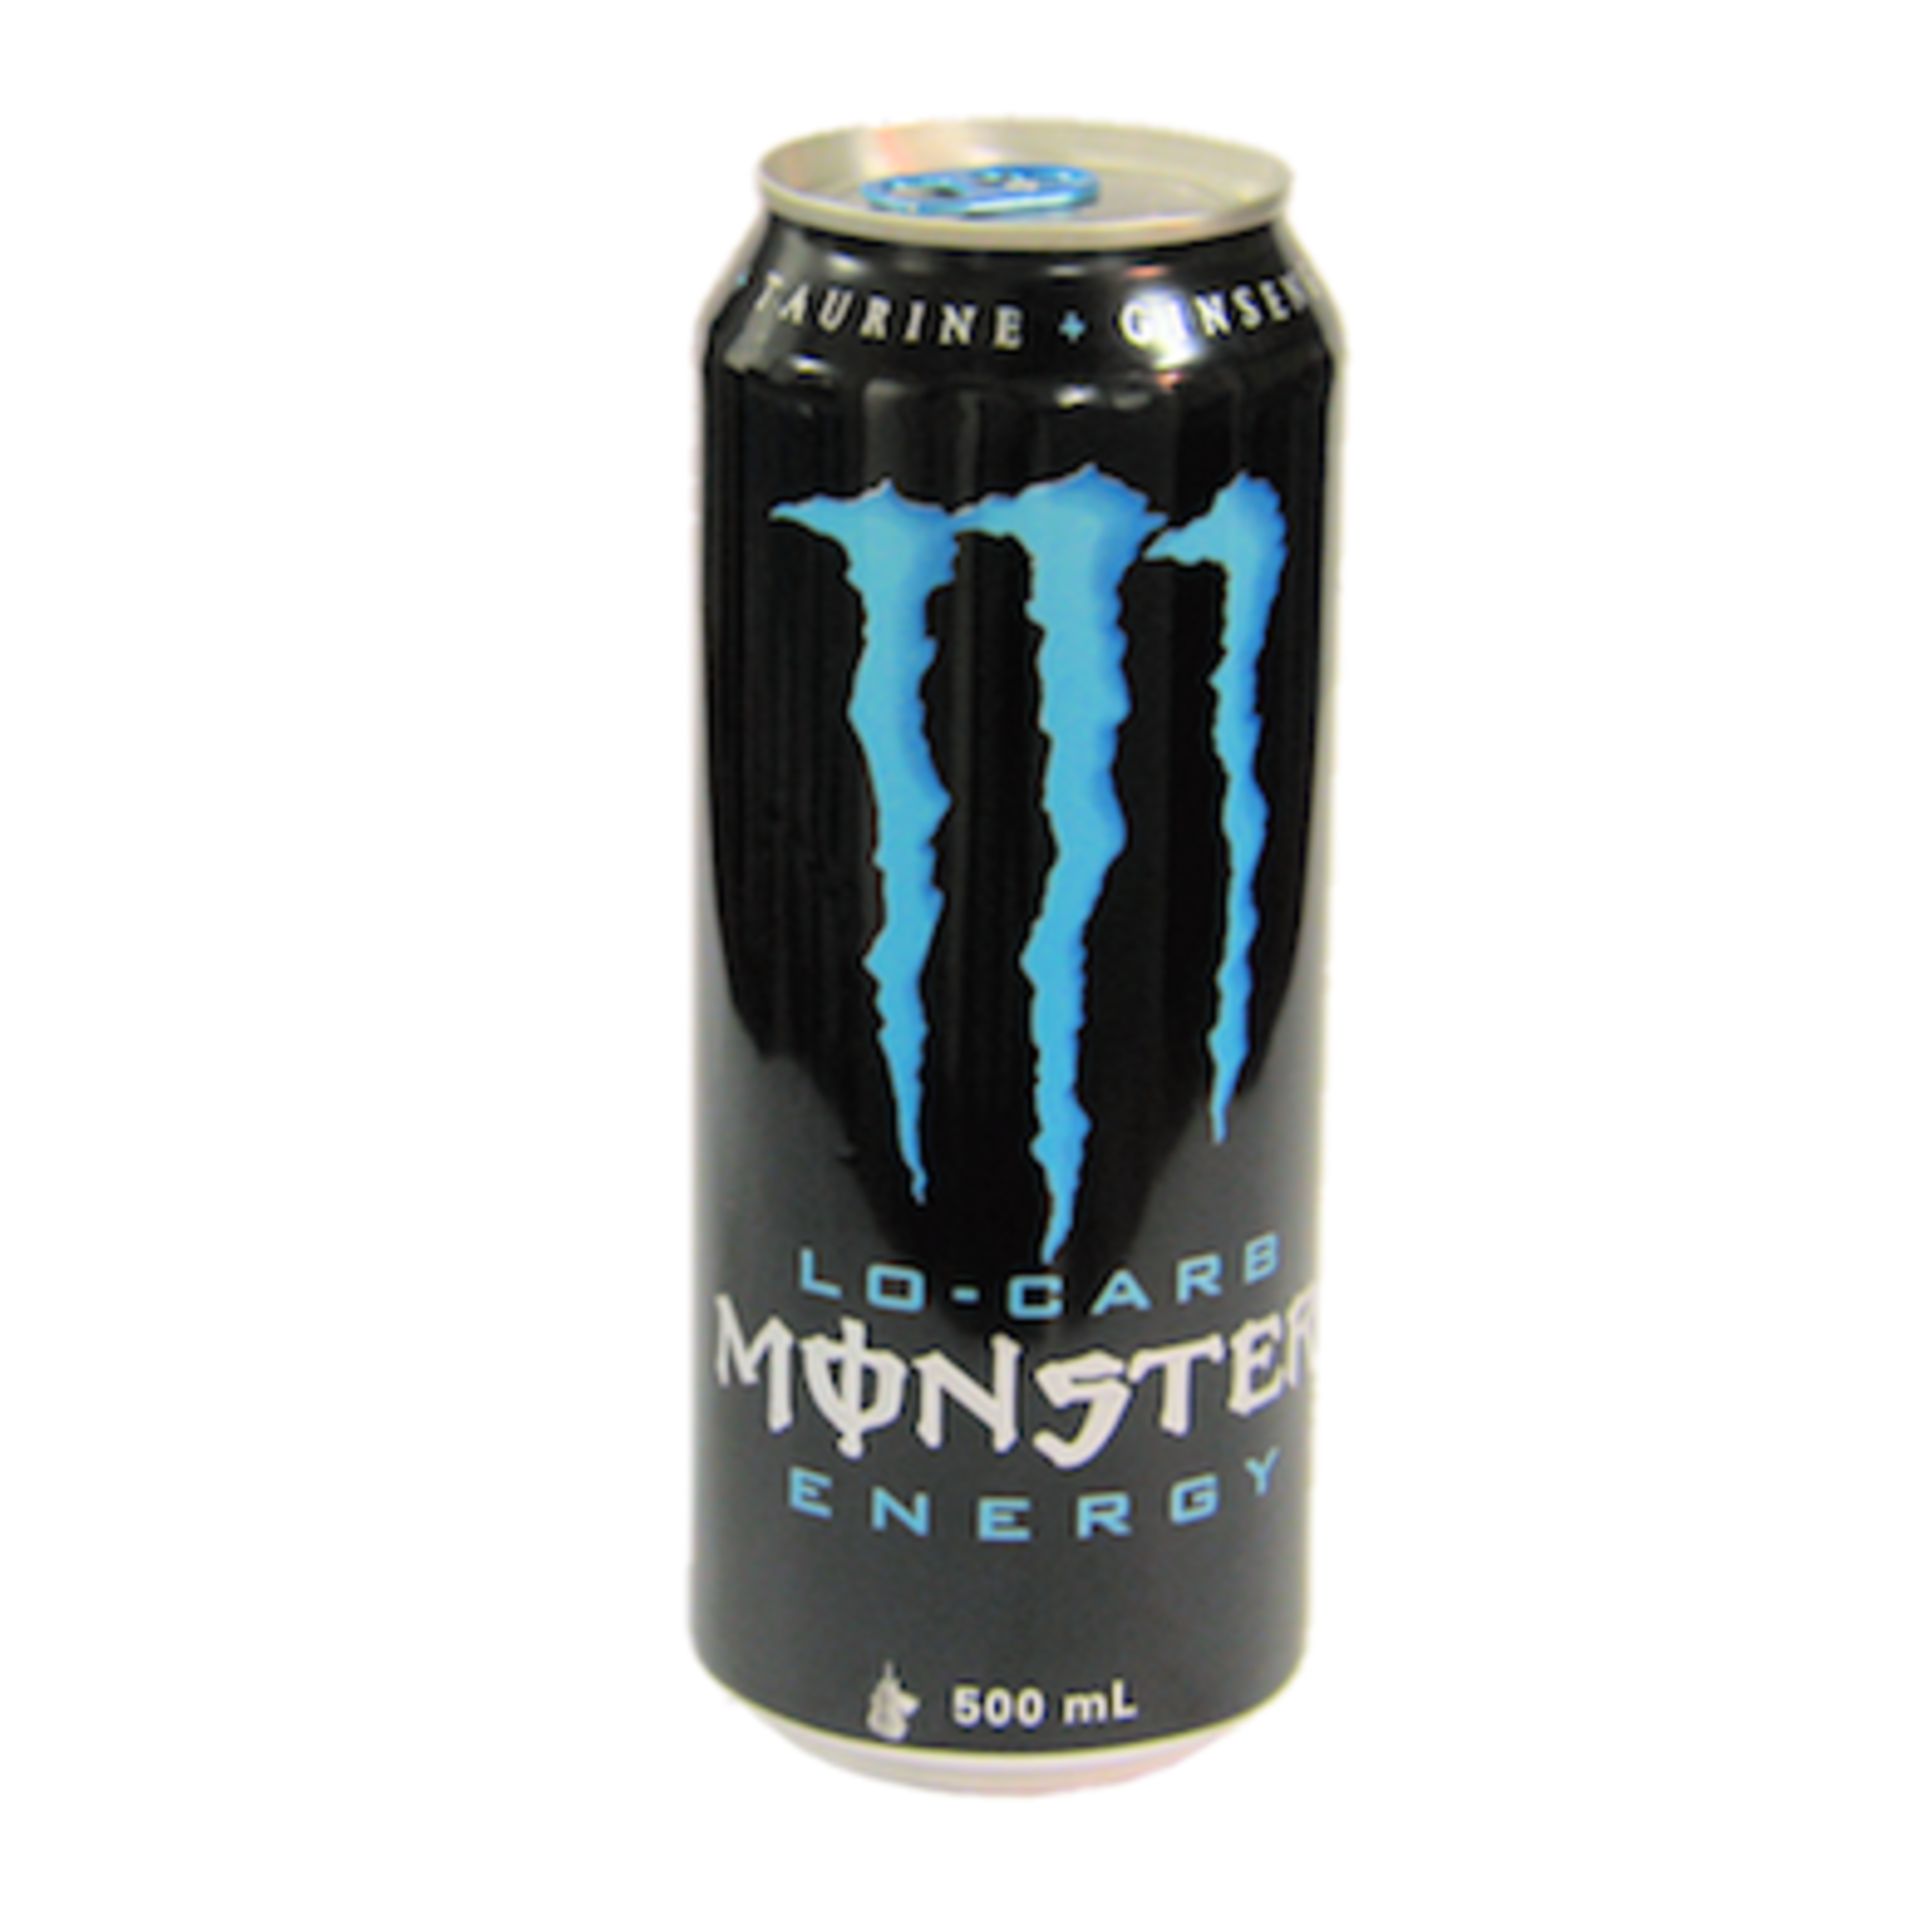 1,800 cans (75 cases of 24 cans) of Monster Lo-Carb Energy Drink